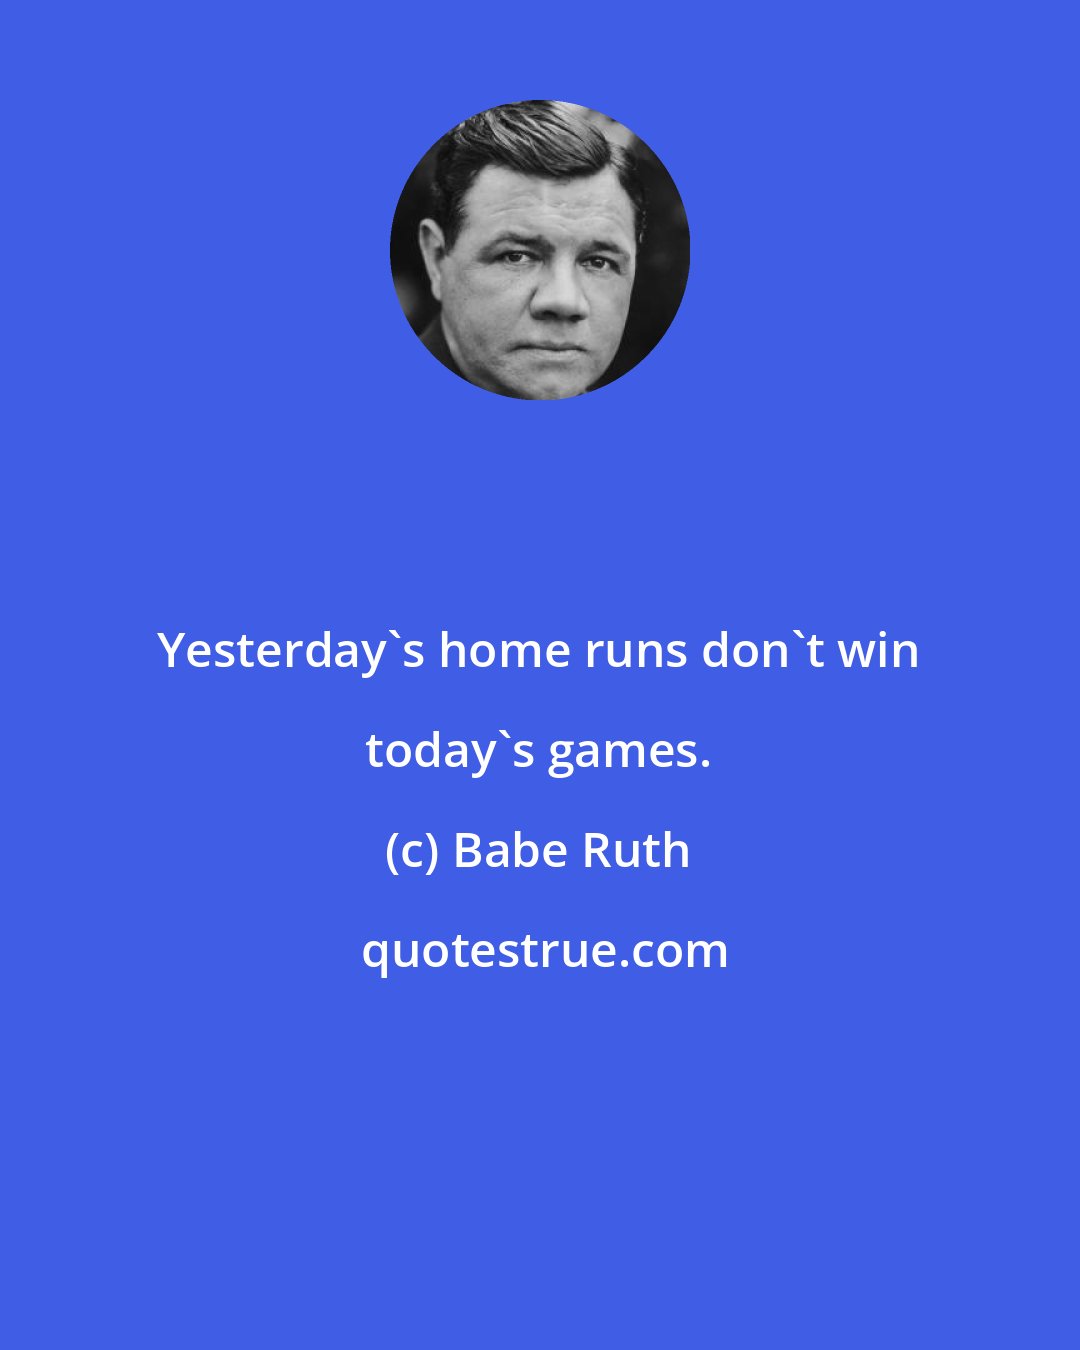 Babe Ruth: Yesterday's home runs don't win today's games.